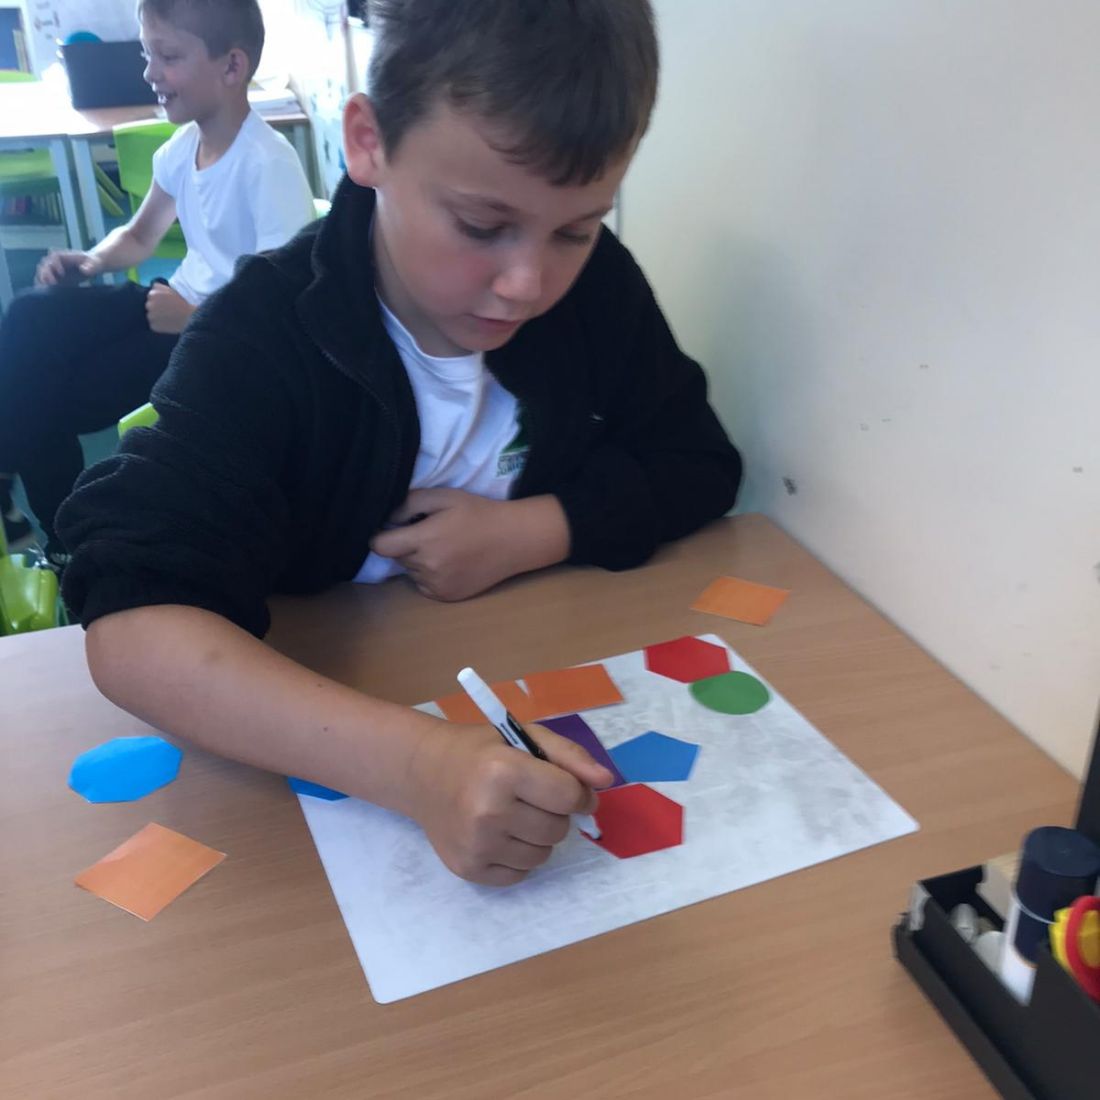 Having fun learning about 2D shapes